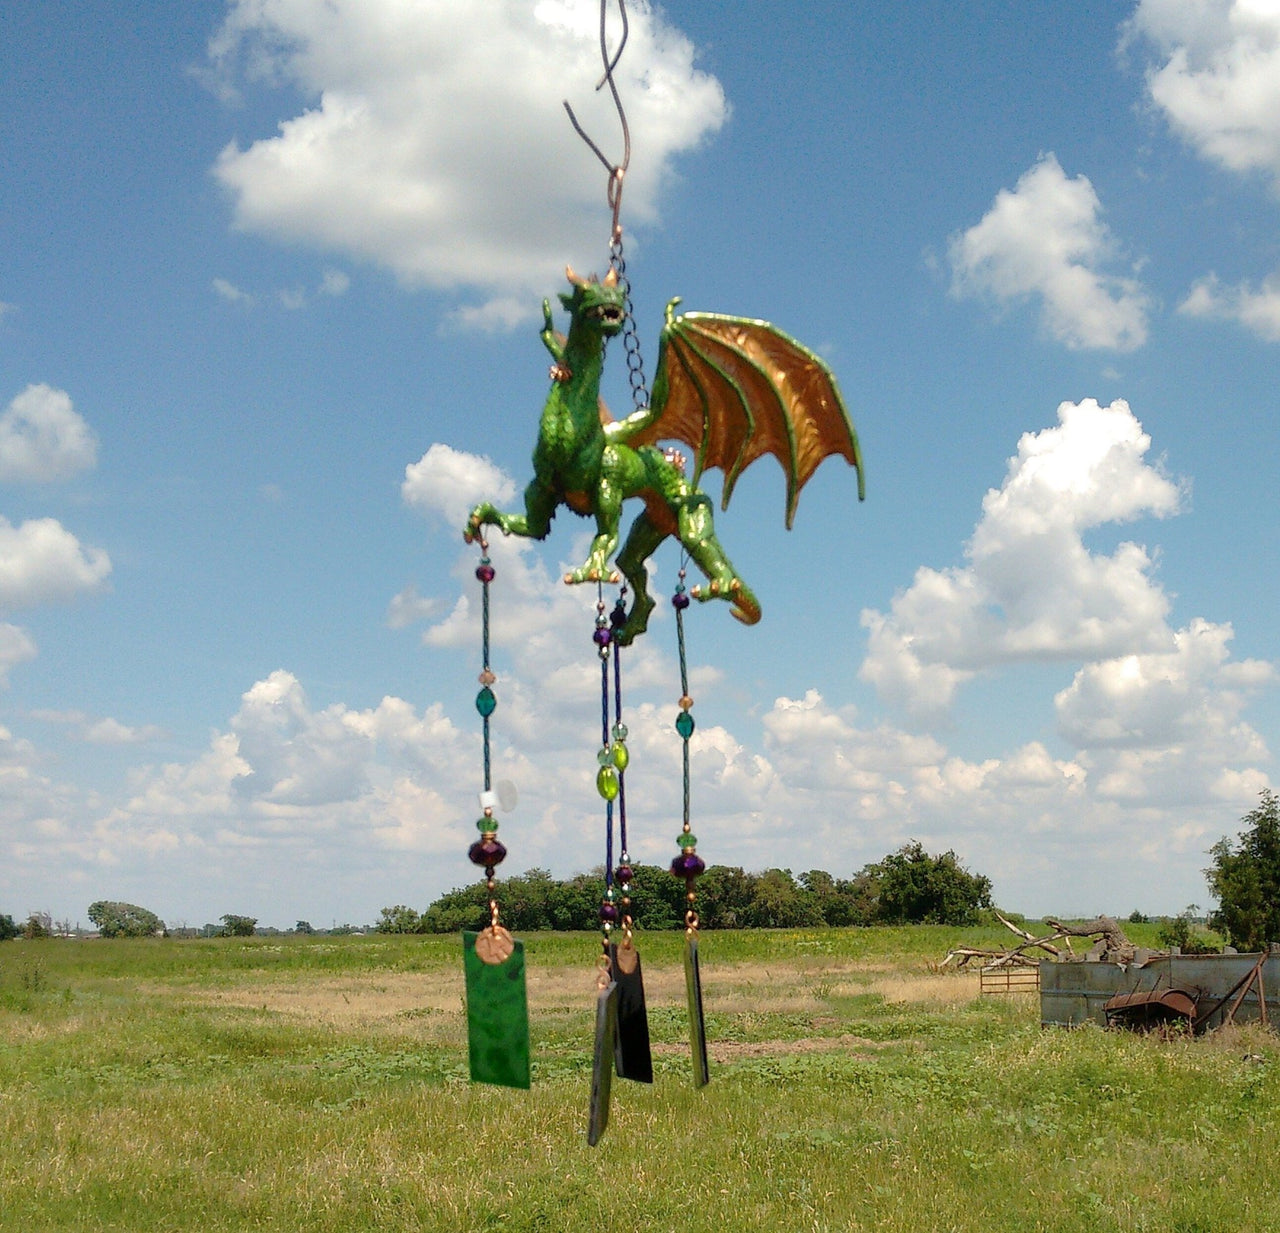 Handcrafted dragon stained glass wind chime garden ornament